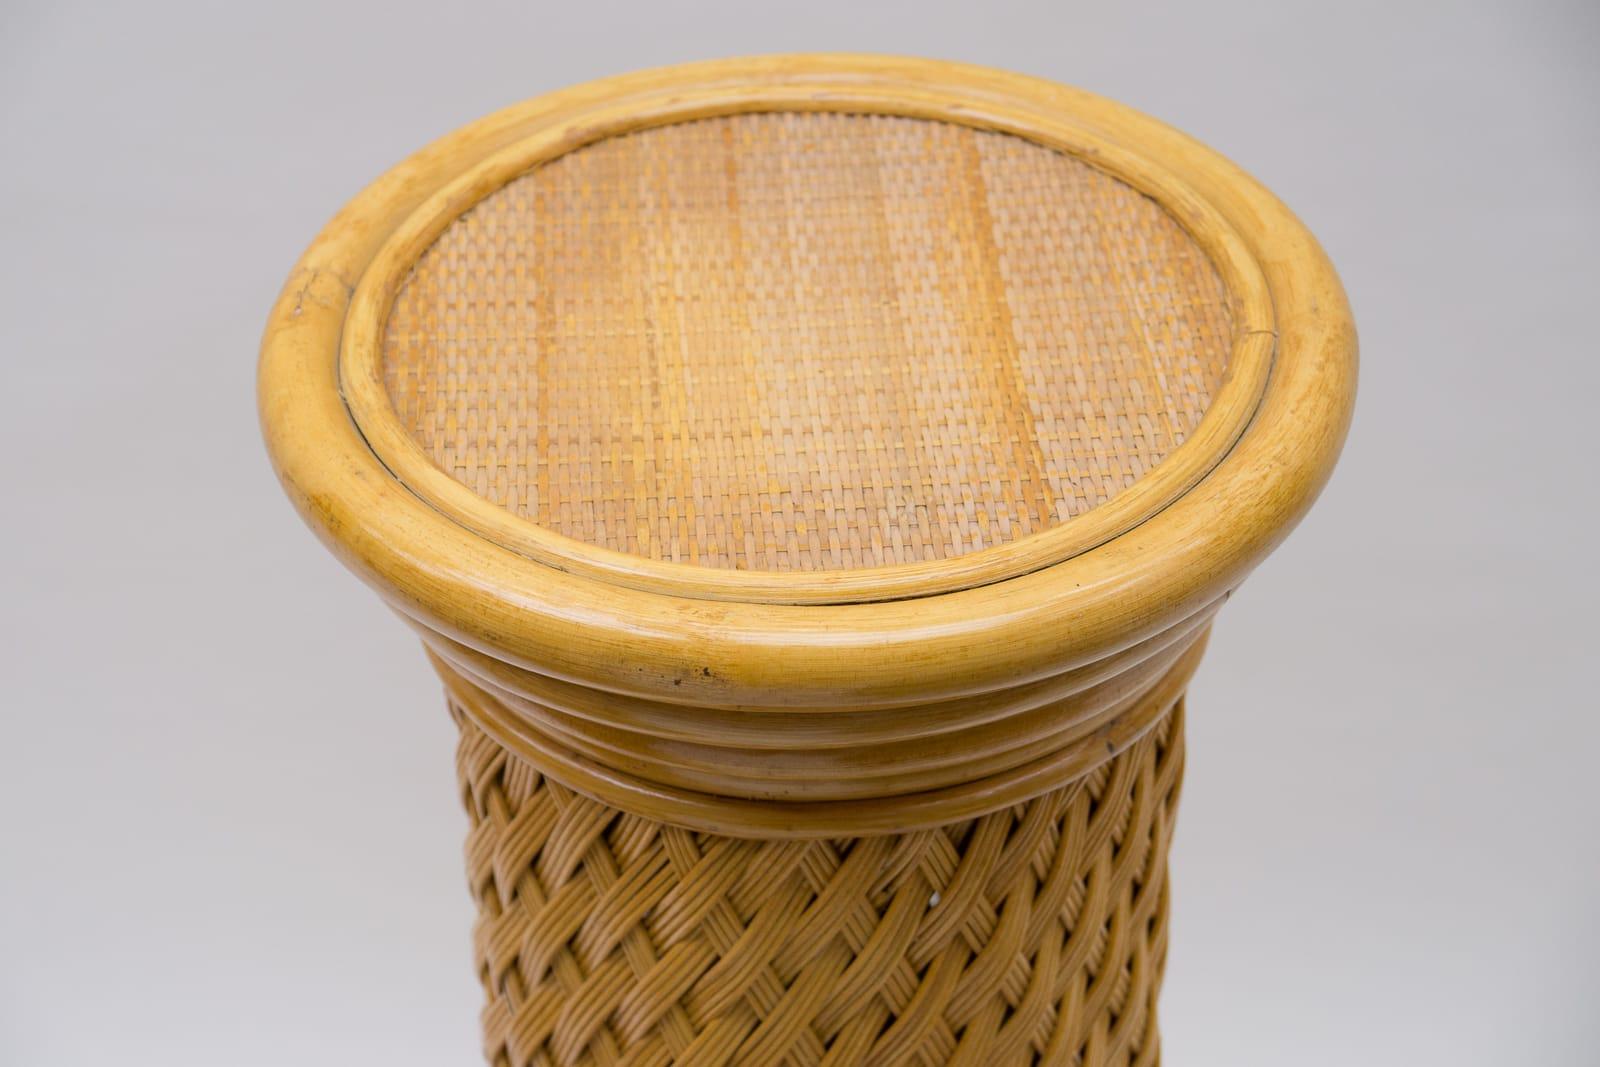 2 Elegant Hollywood Regency Rattan Wicker and Bamboo Columns, 1960s, Italy For Sale 4